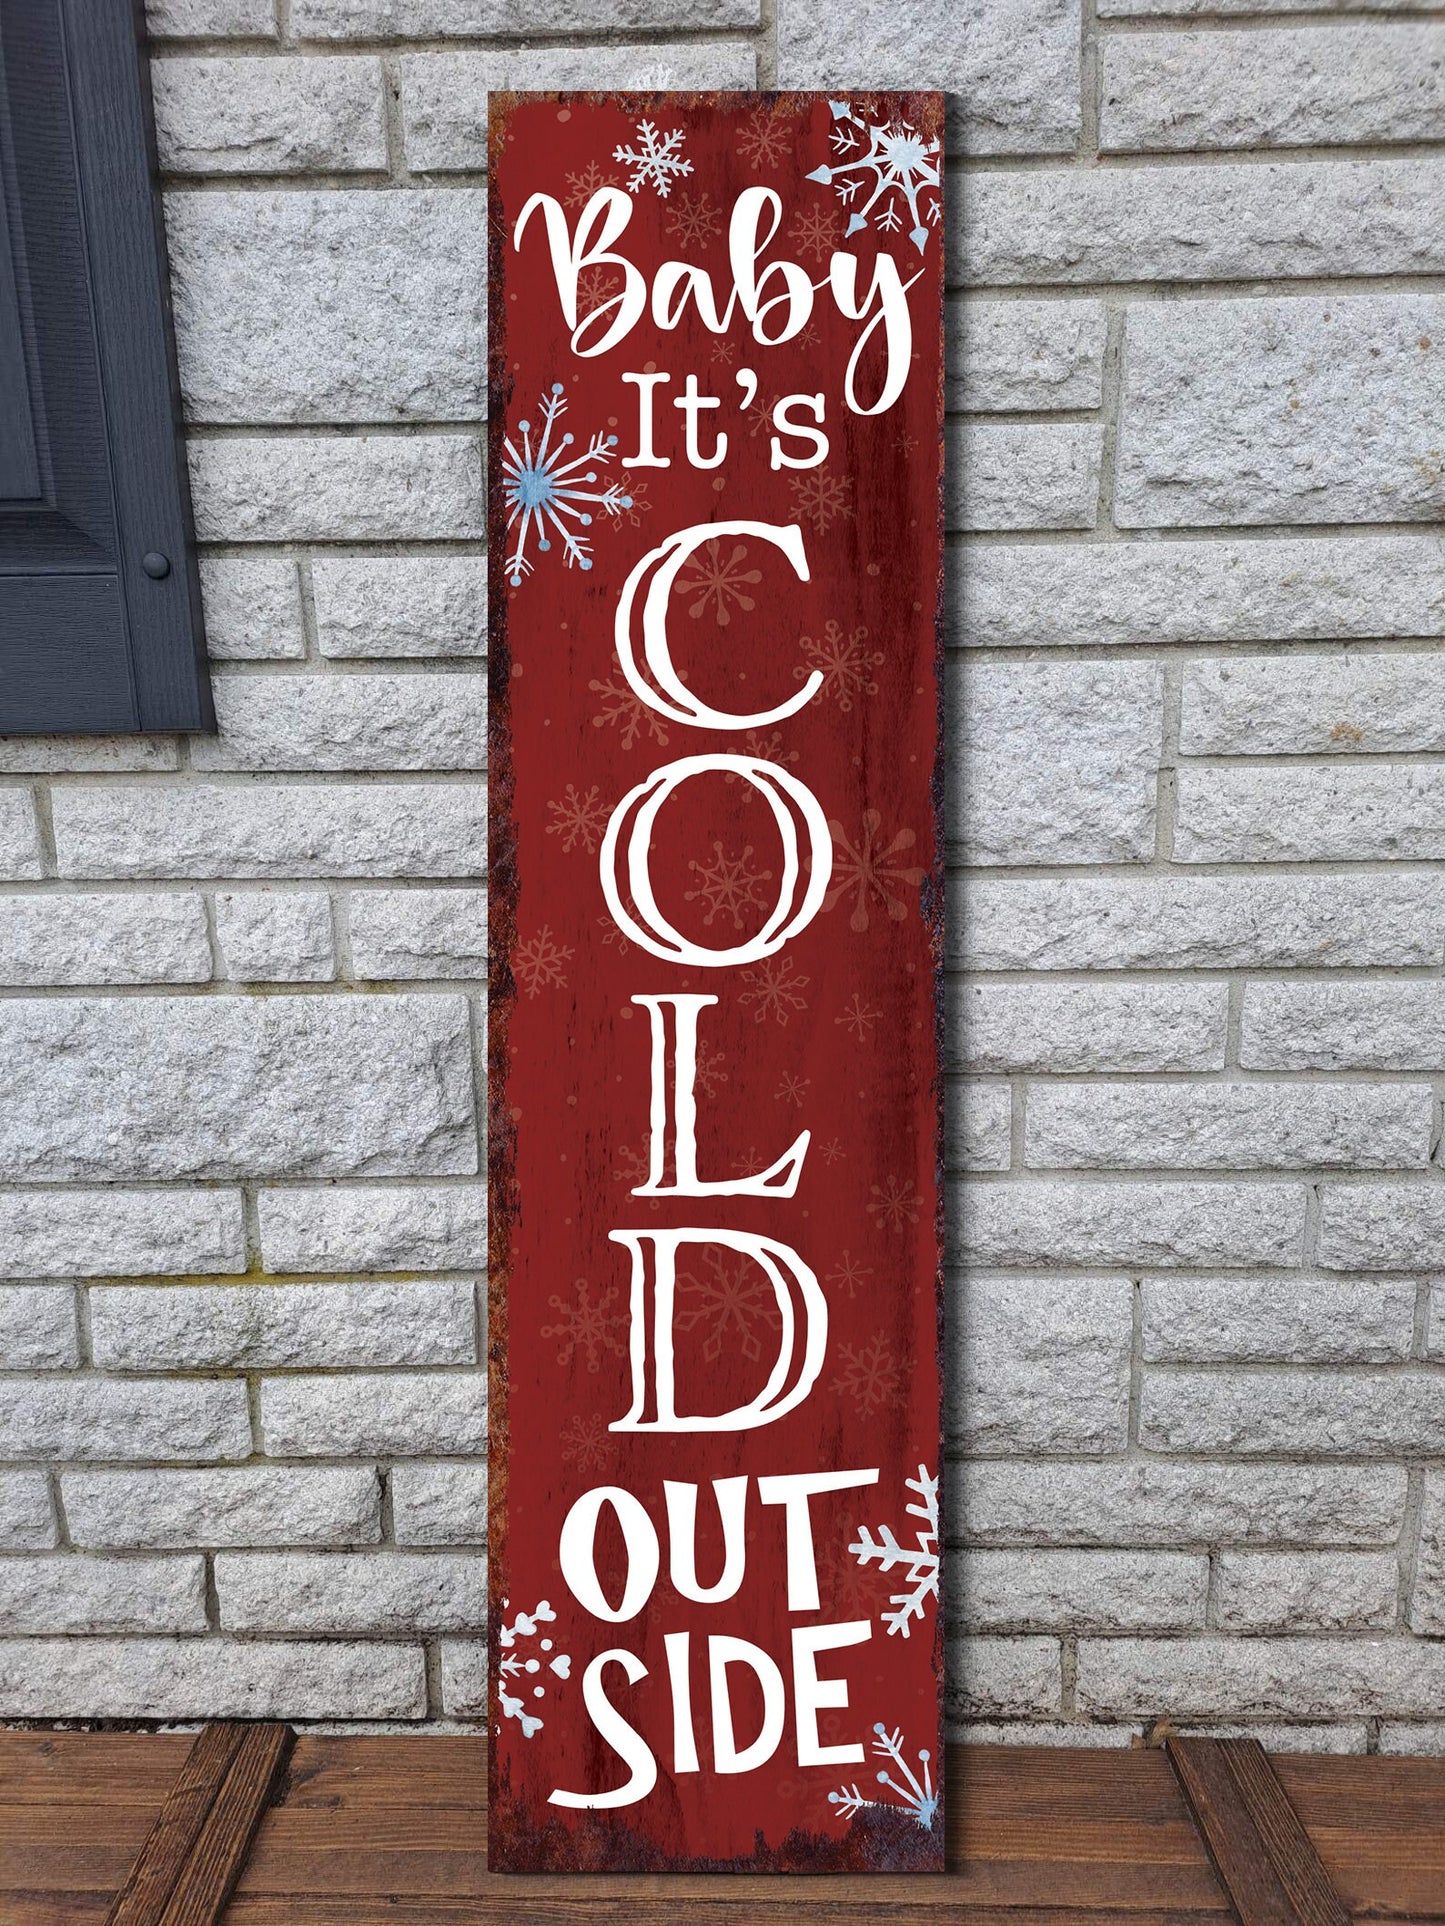 36in "Baby It's Cold Outside" Christmas Porch Sign | Front Porch Welcome Display | Rustic Modern Farmhouse Decor | Festive Entryway Board